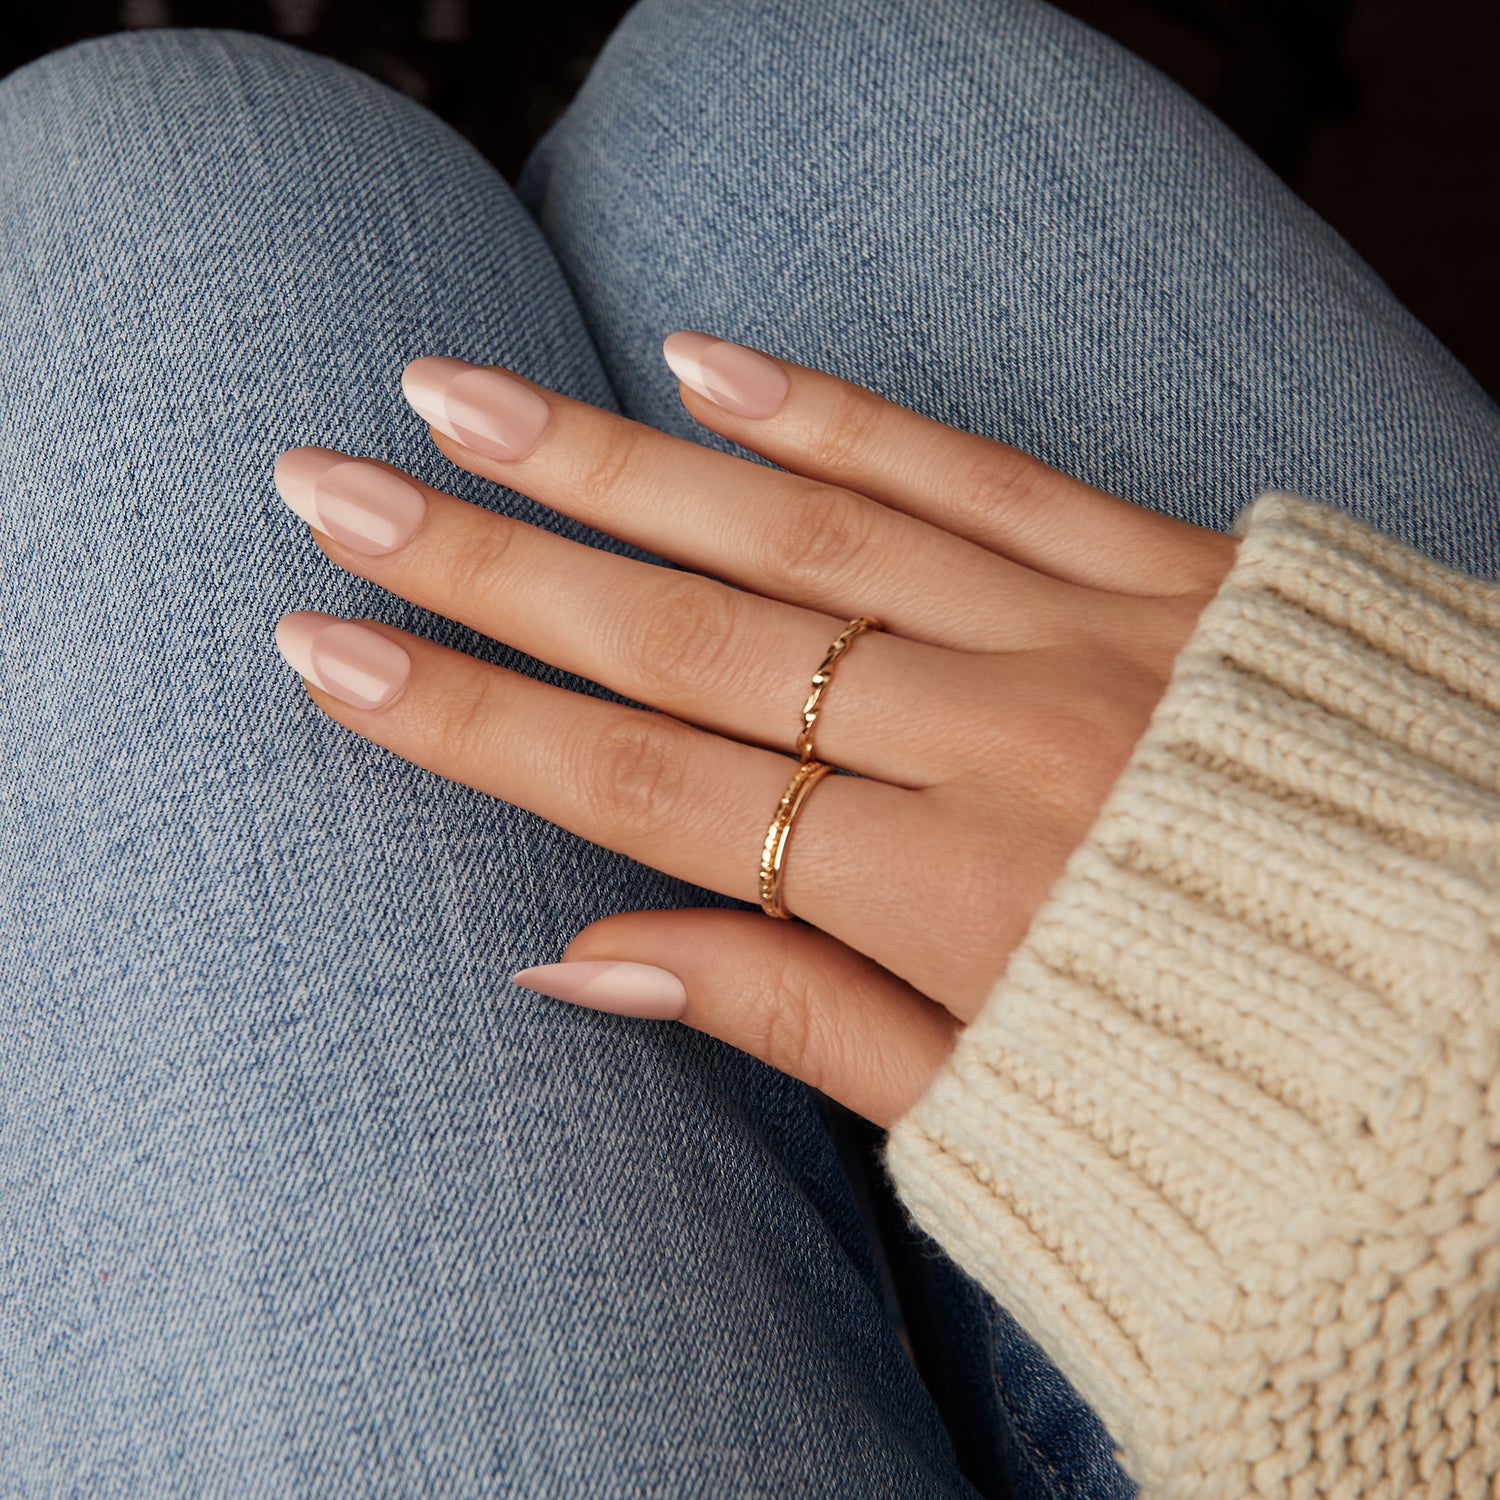 Medium length, almond shape, glossy finish. Tan & beige press-on gel nails featuring an illusion french style design.